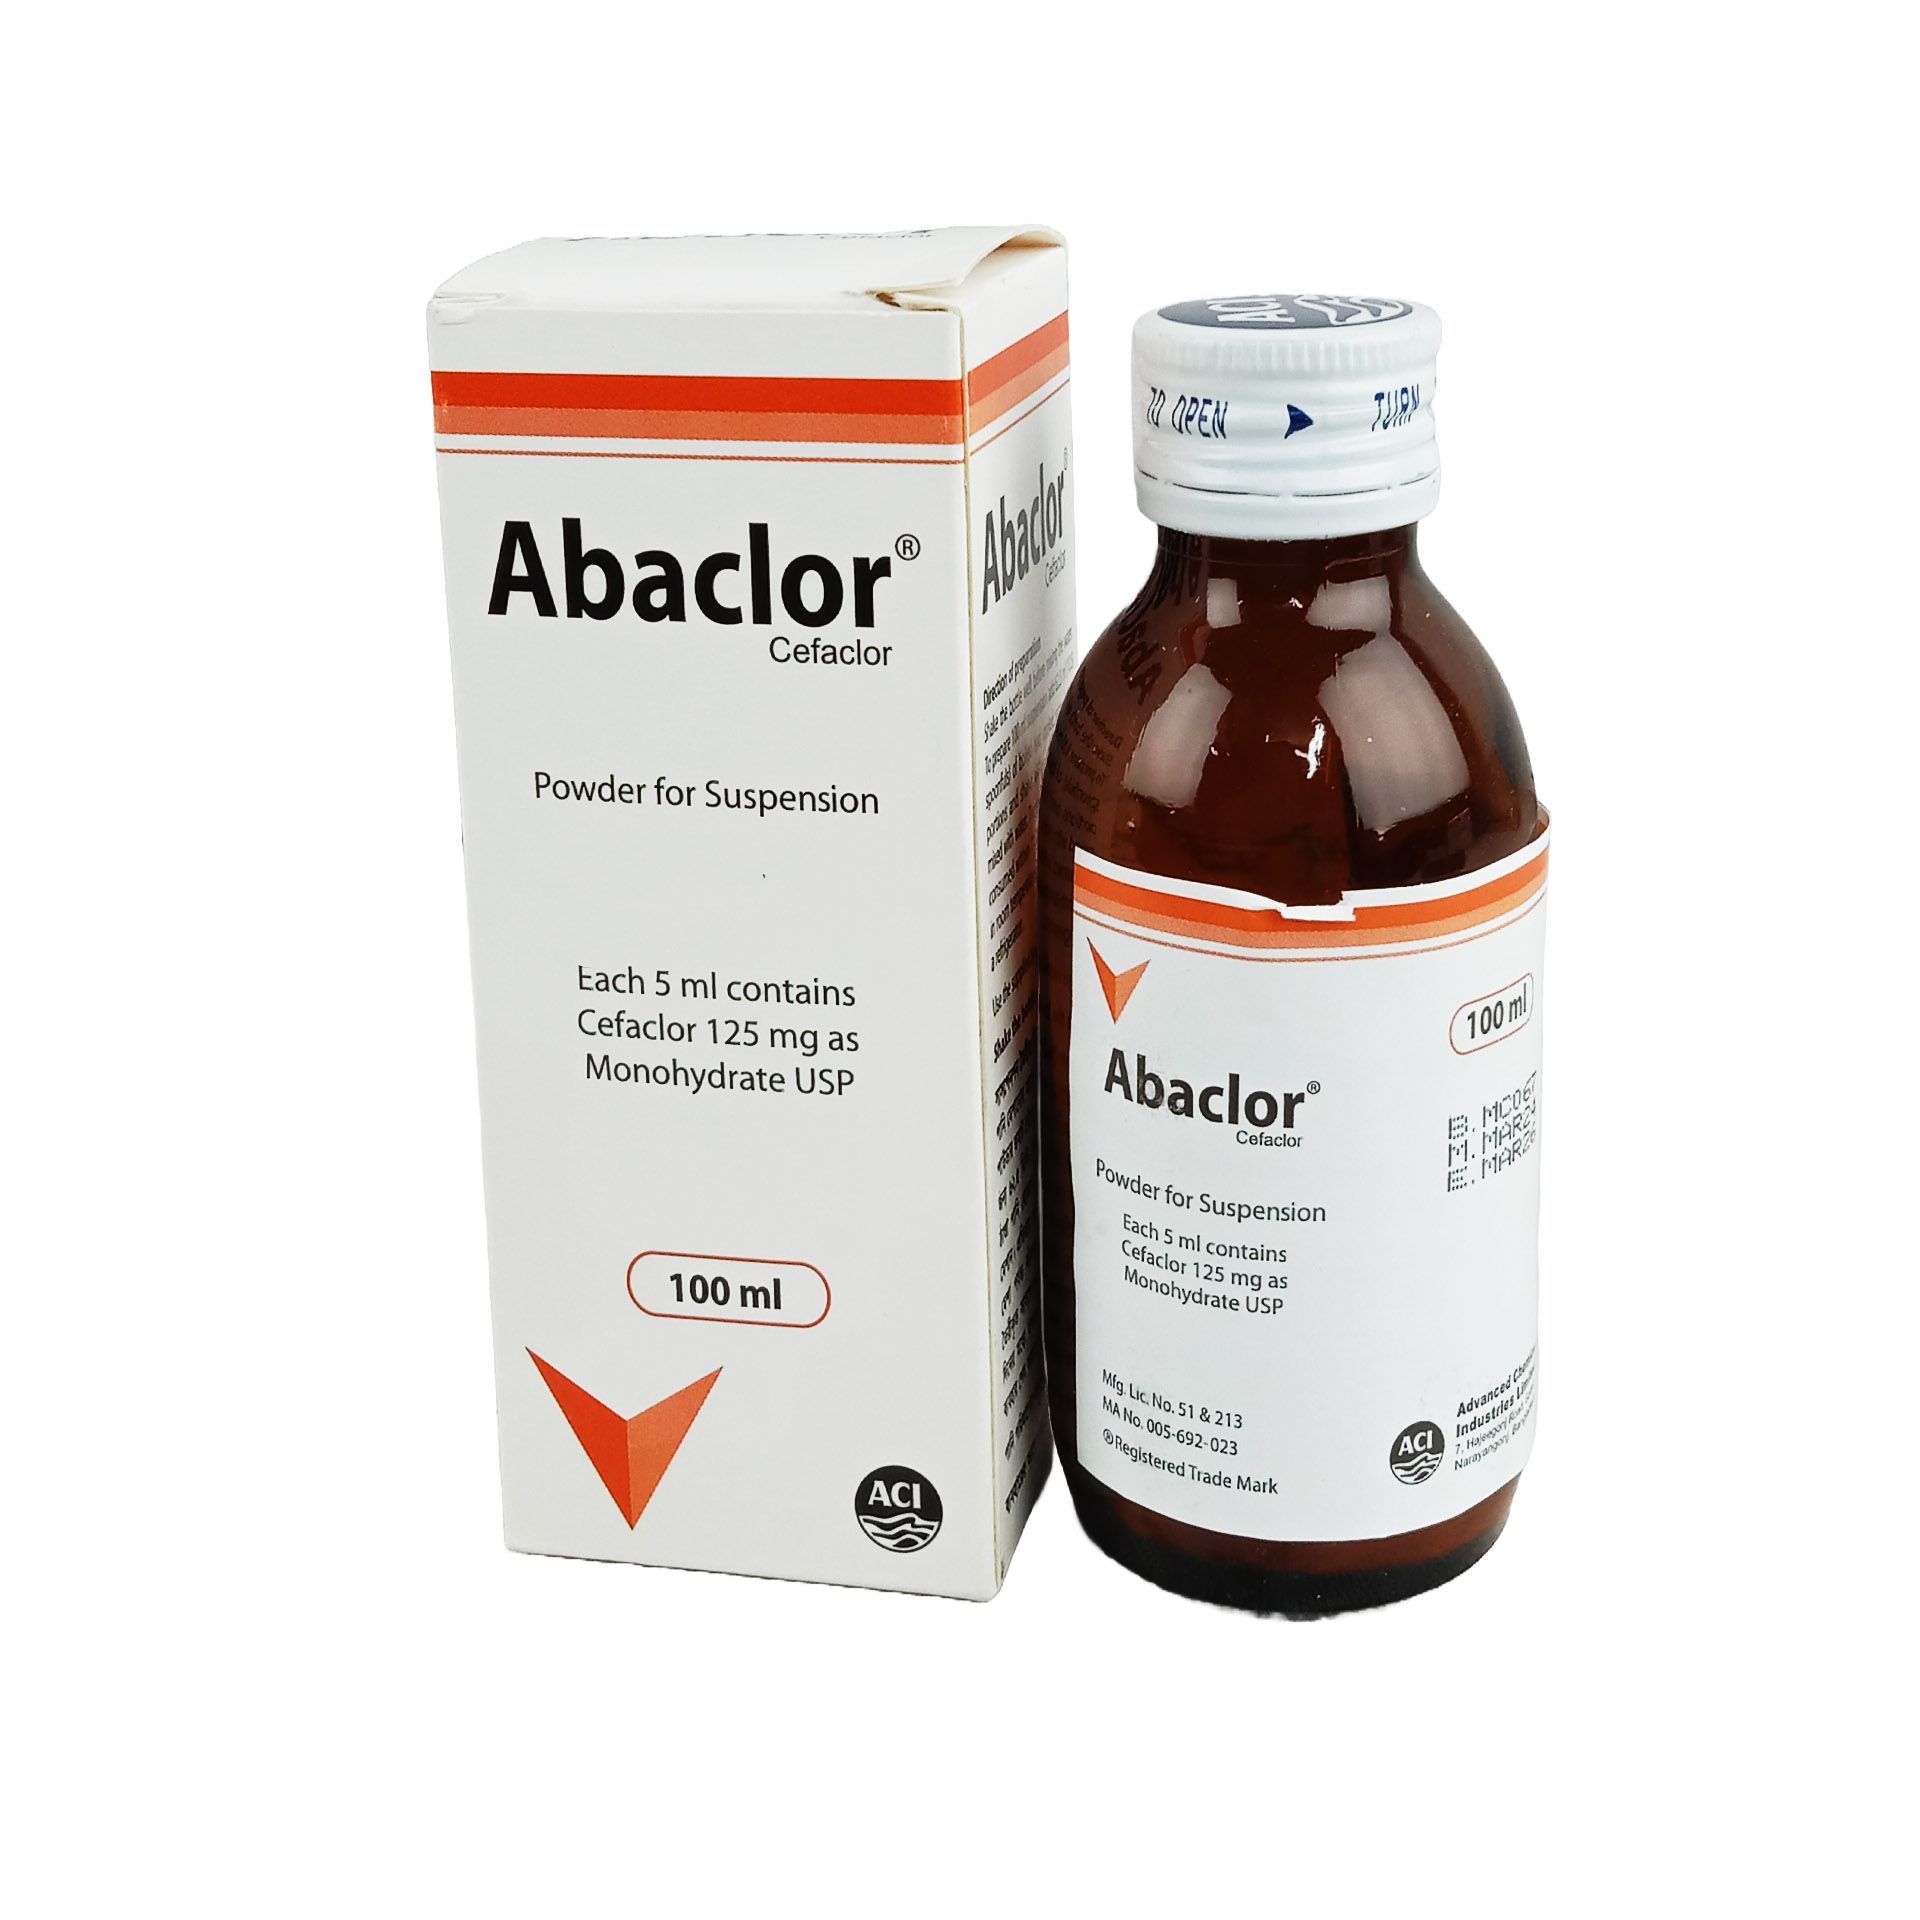 Abaclor 125mg/5ml Powder for Suspension